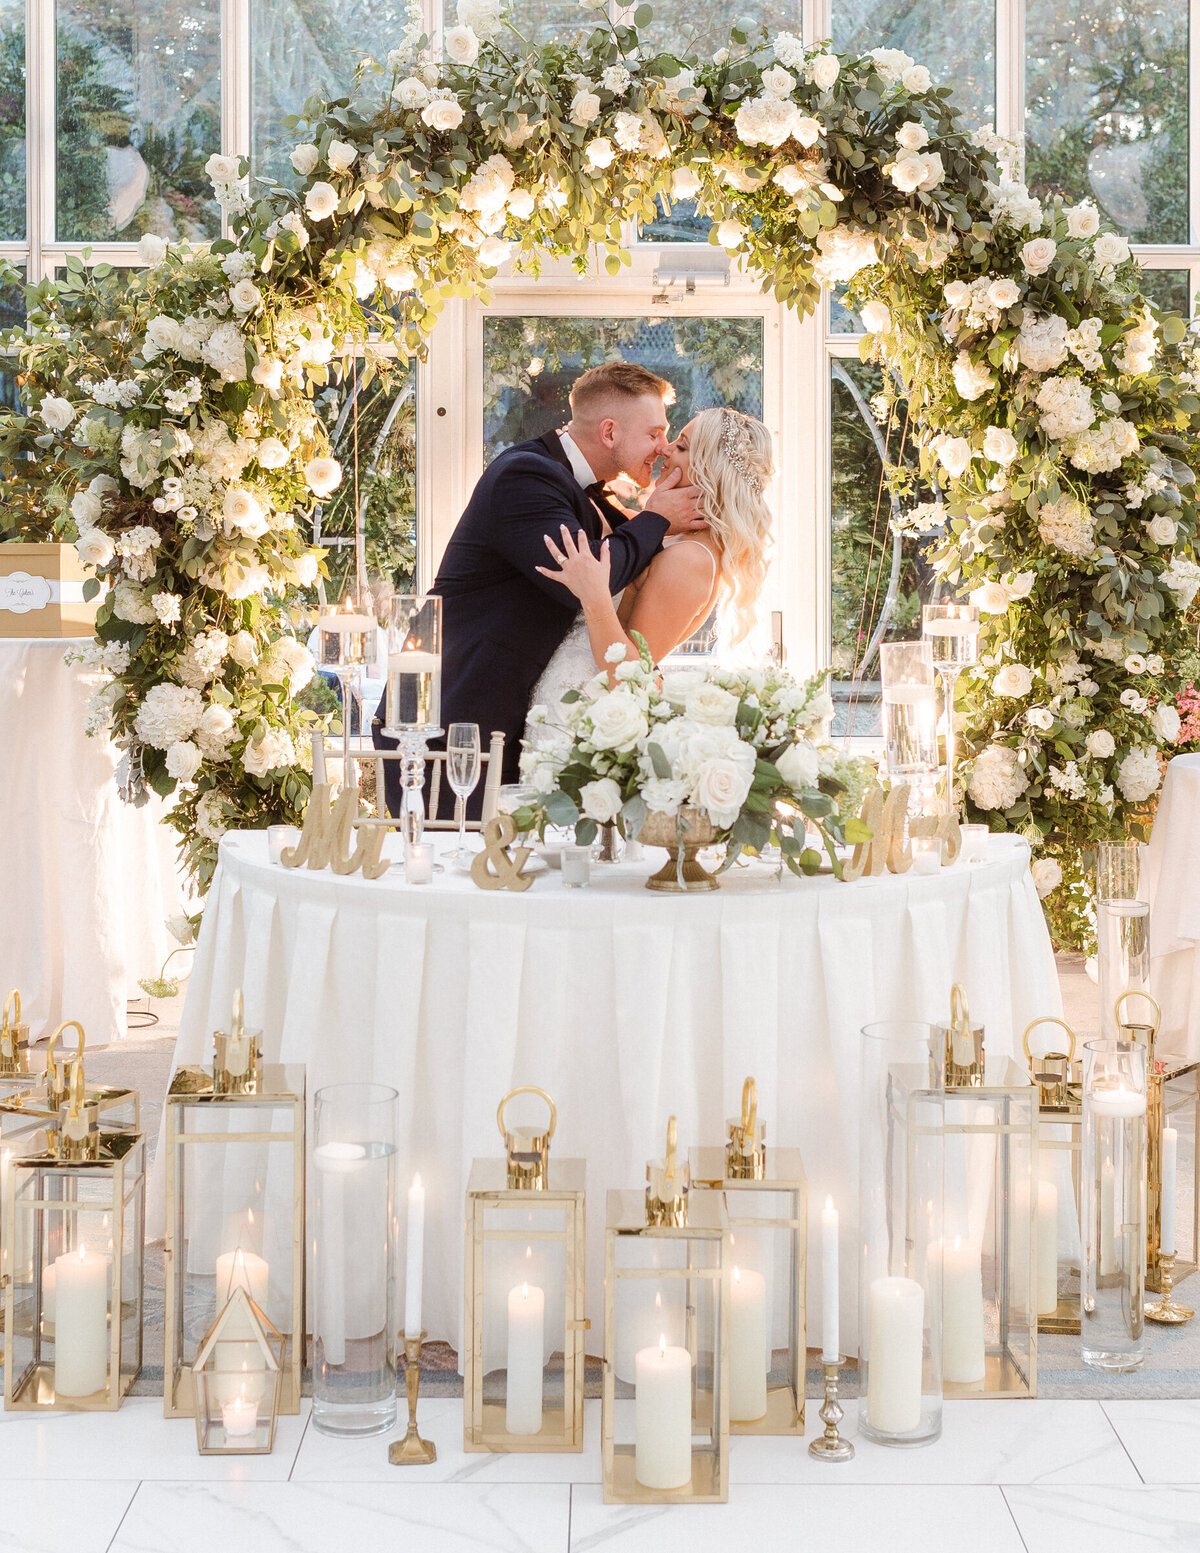 creative-wedding-photo-bride-and-groom-at-sweetheart-table